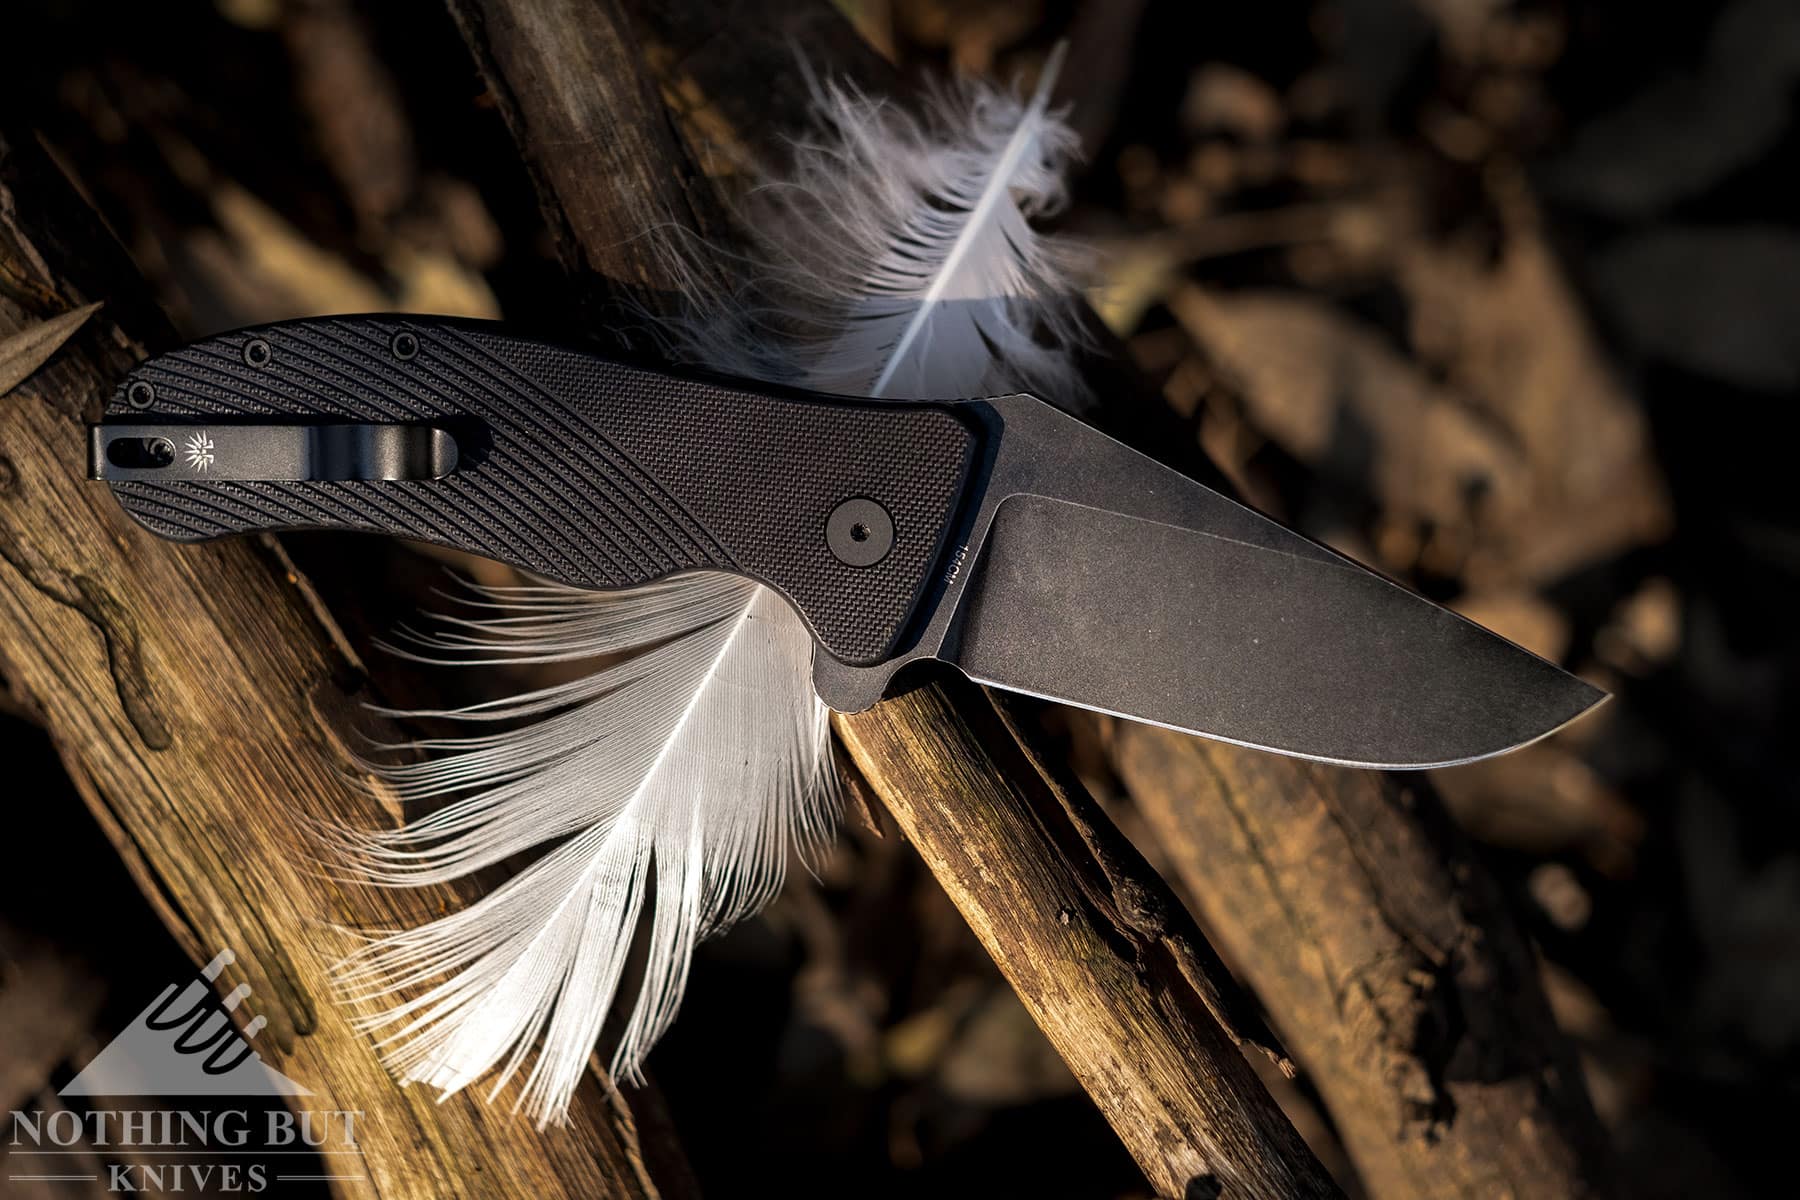 The oFF-gRID rHINO v2 is an even better outdoor tool than the original. 